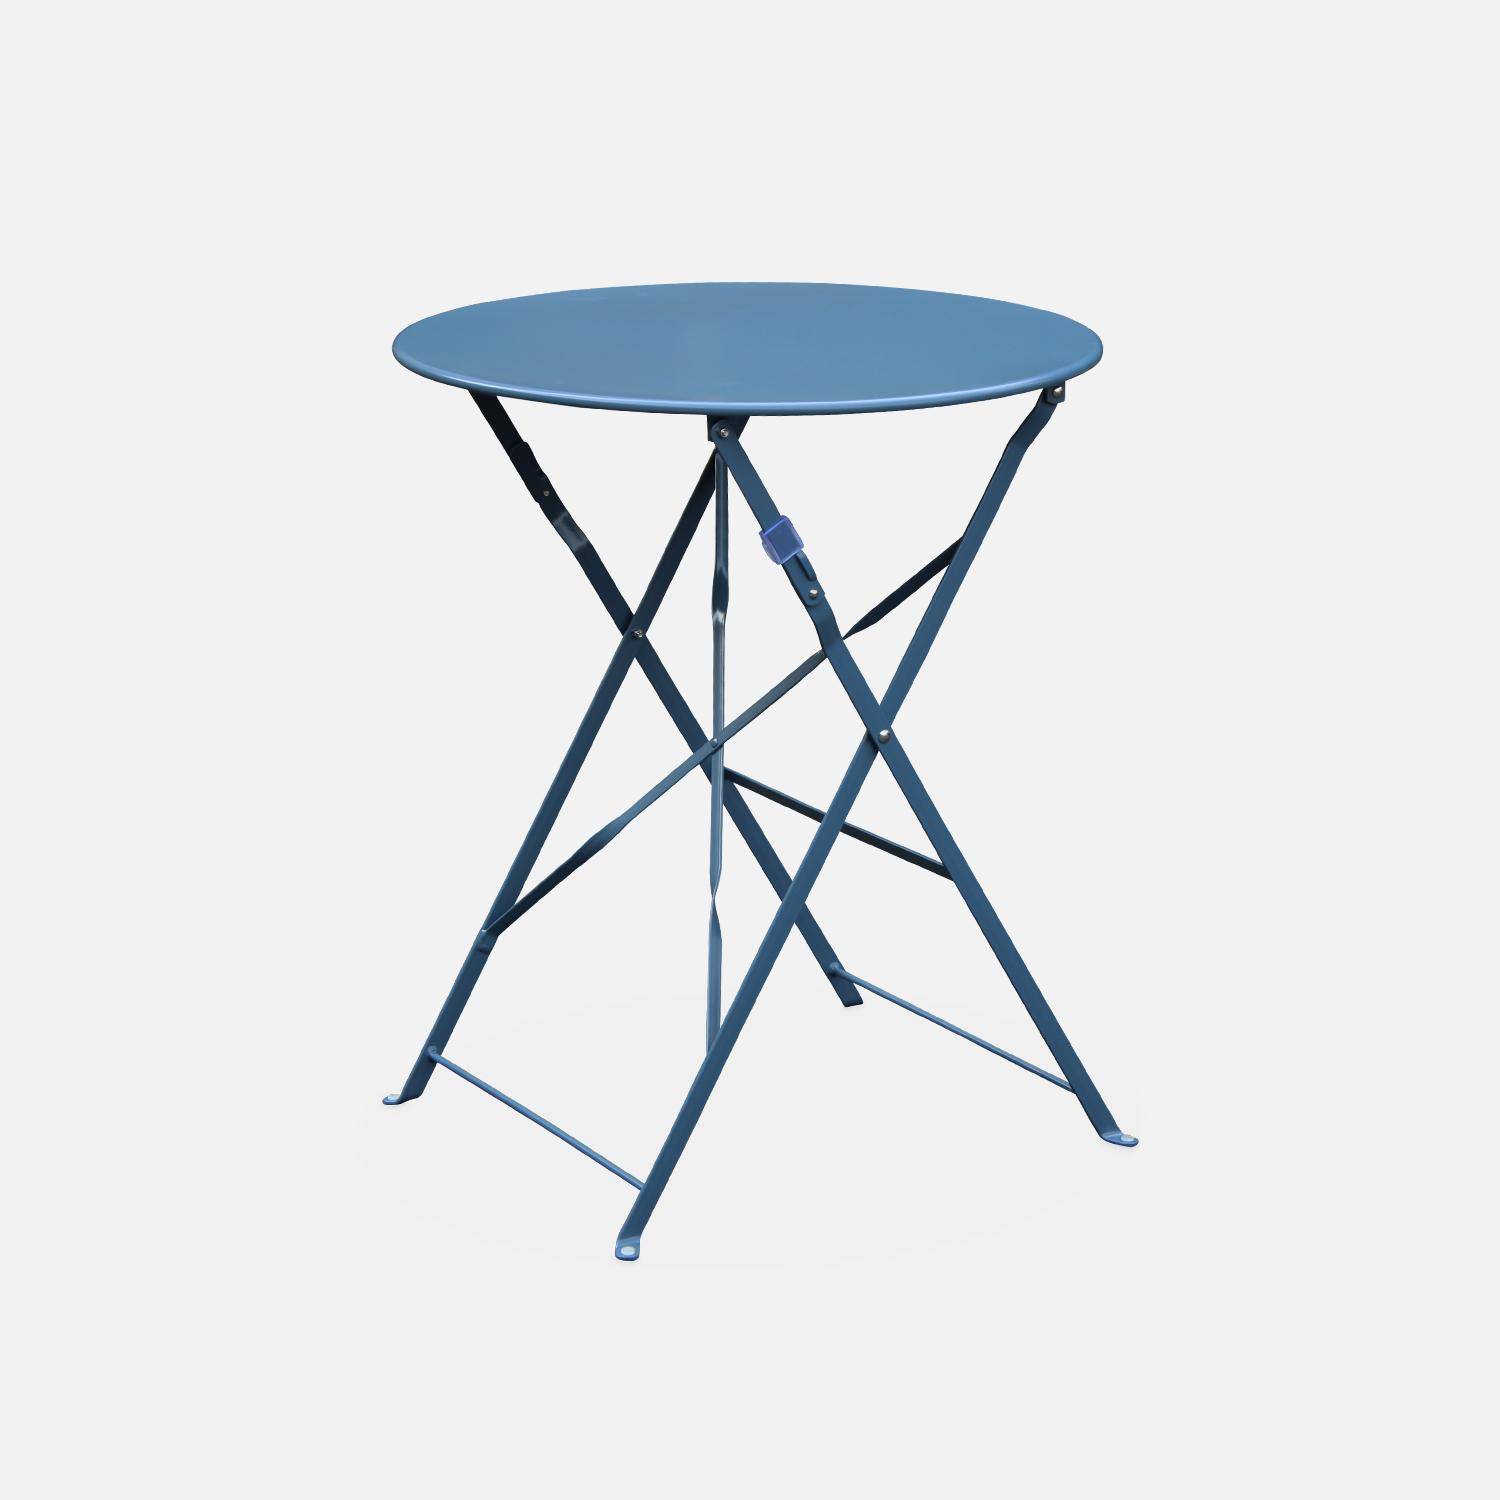 Foldable bistro garden table - Round Emilia grey blue - Round table Ø60cm, thermo-lacquered steel,sweeek,Photo4